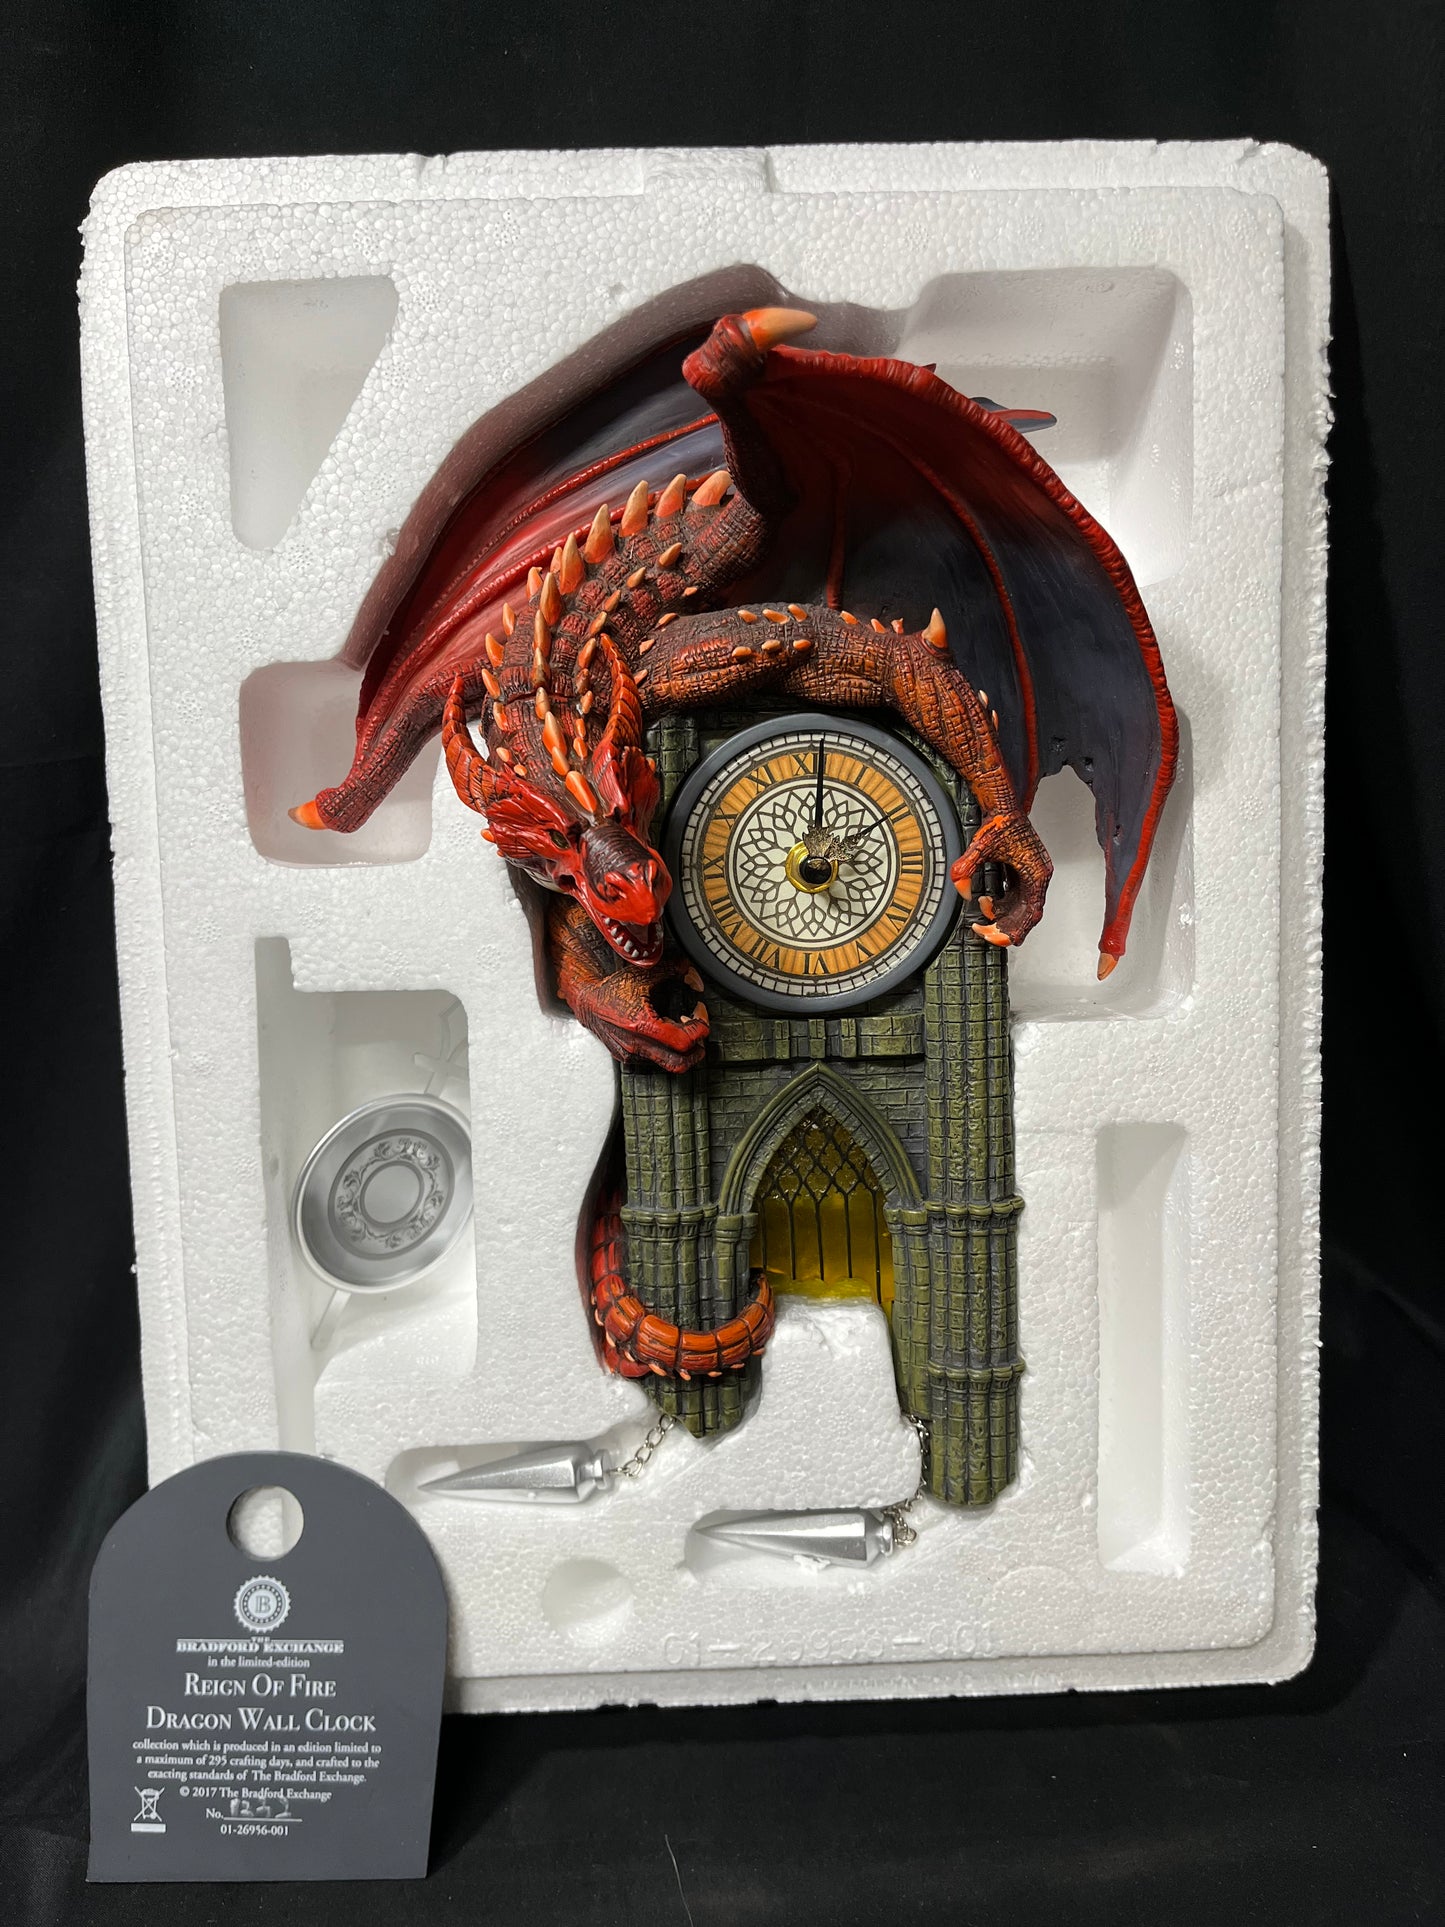 Bradford Exchange Reign of Fire Dragon Illuminated Wall Clock with Sound 2017